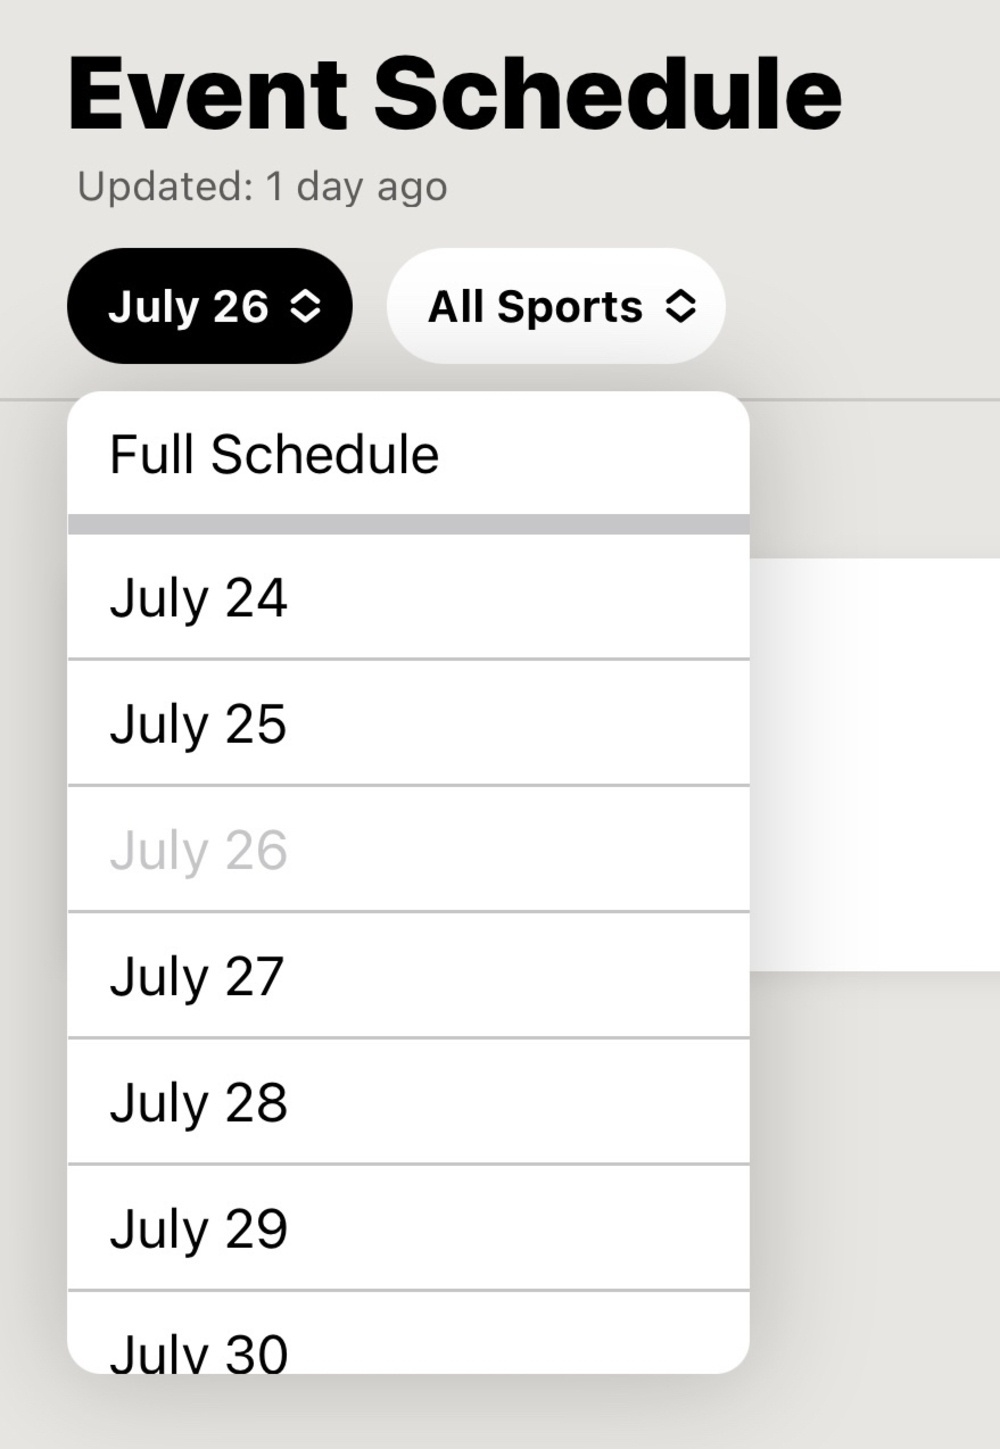 Olympics event schedule in Apple News. The date picker is a drop down, with July 24 through July 30 visible in the screenshot.